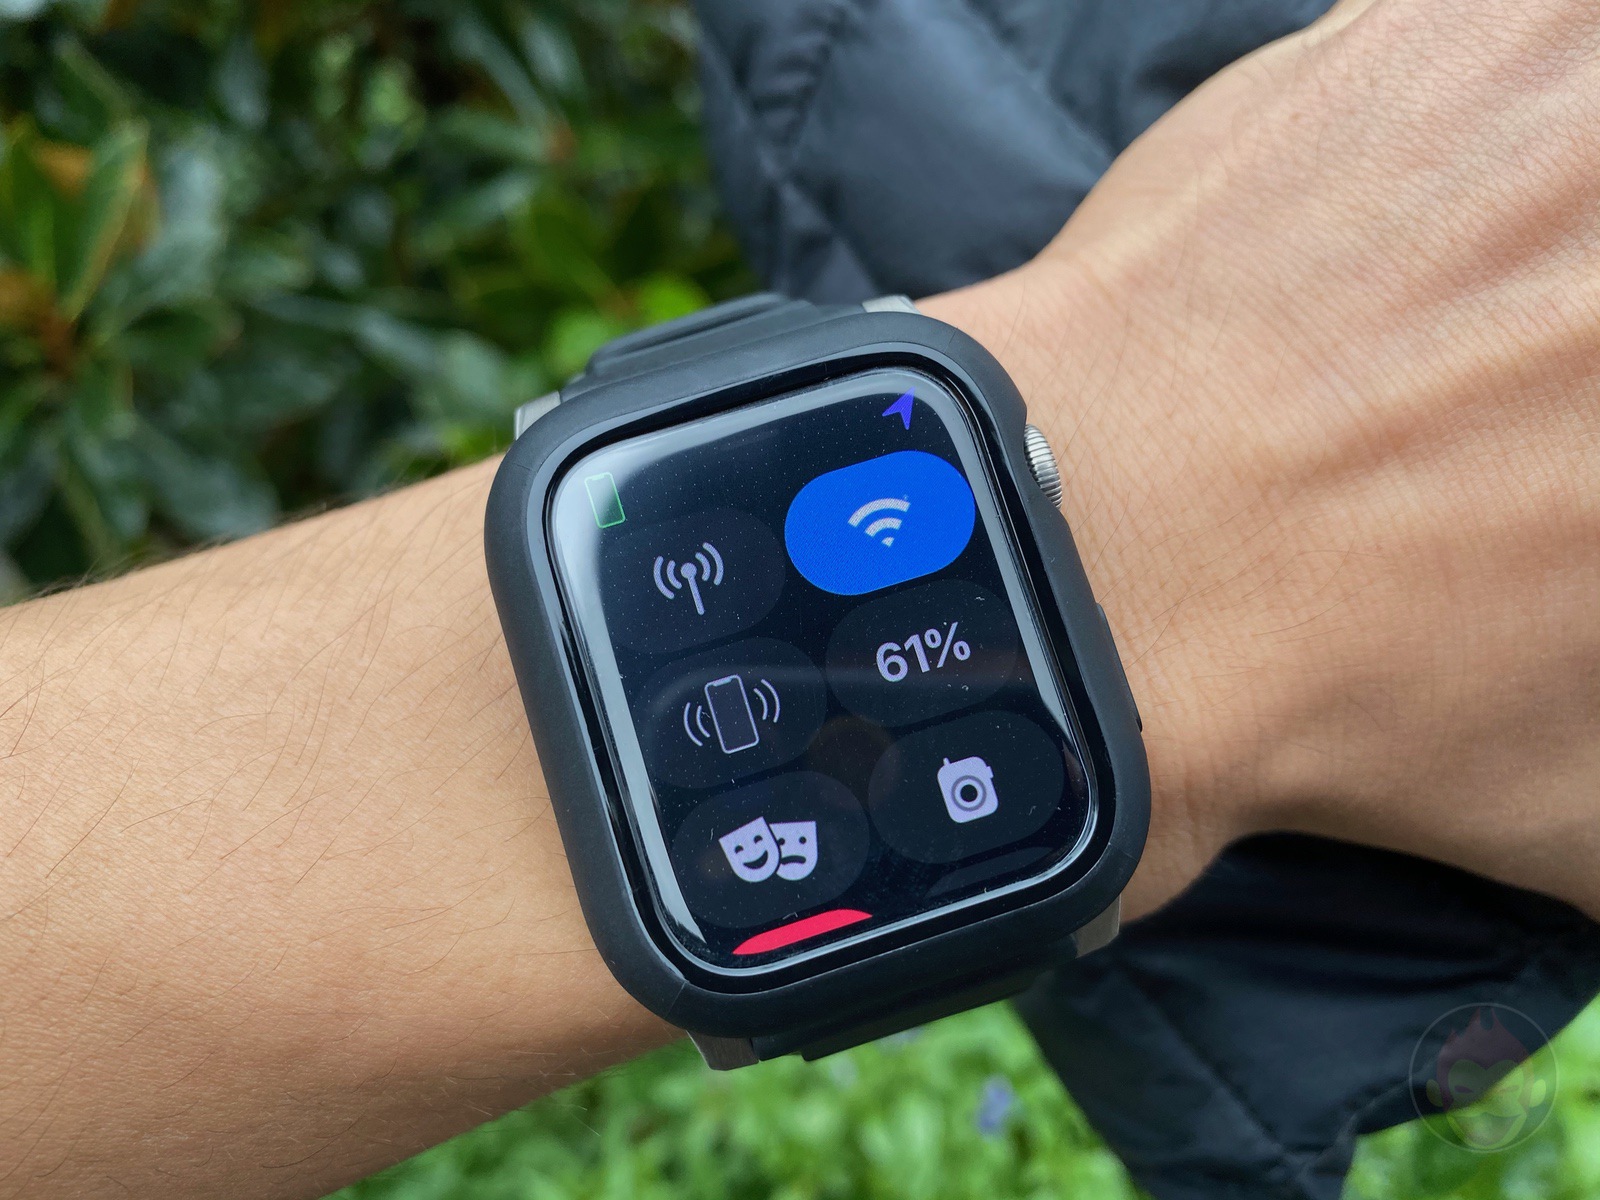 AppleWatchSeries6 With AODisplay ON 06